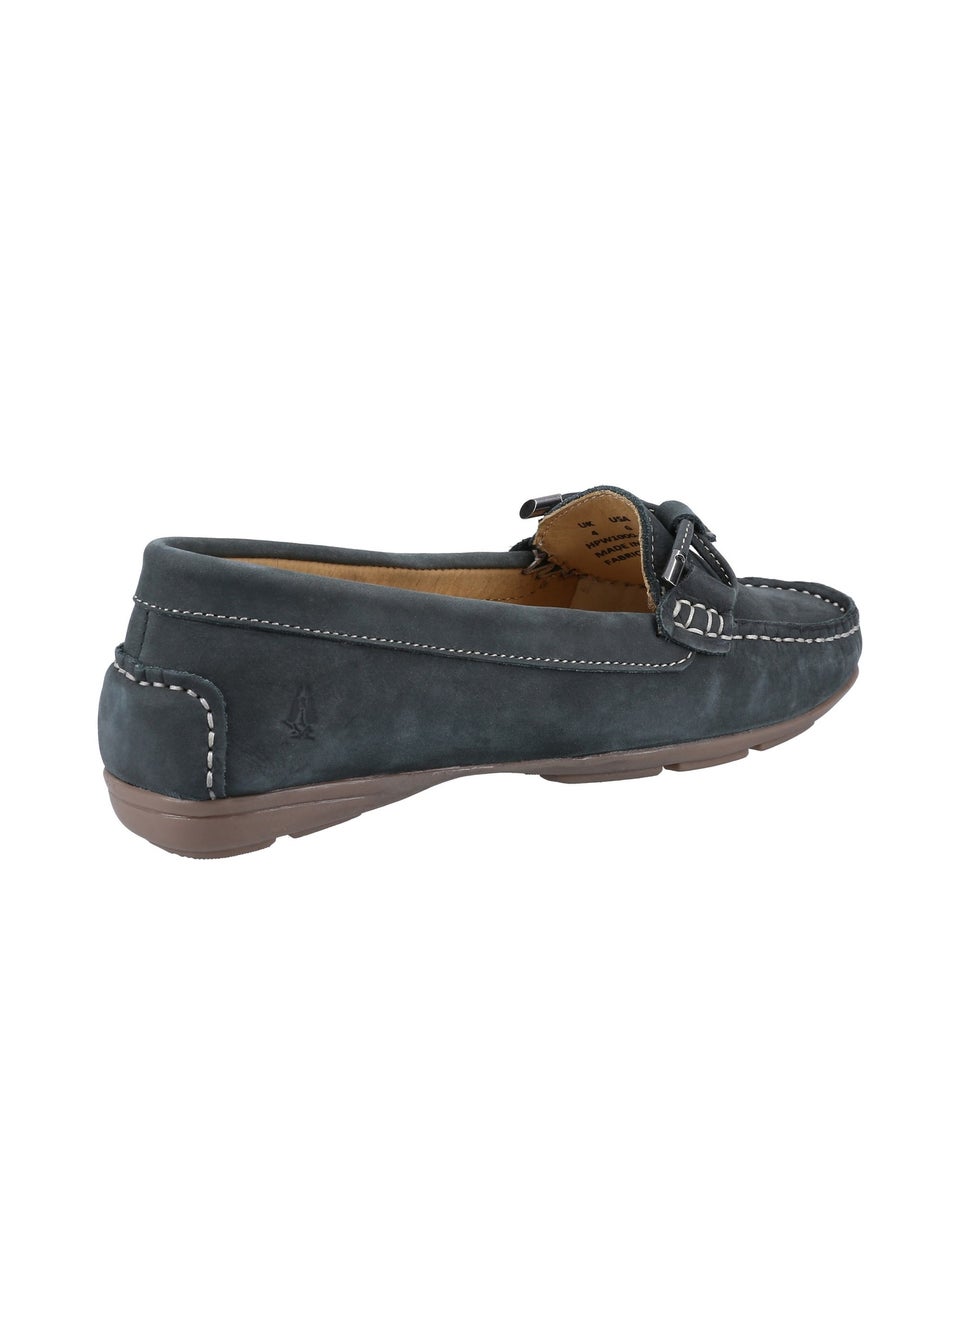 Hush Puppies Navy Maggie Toggle Shoe